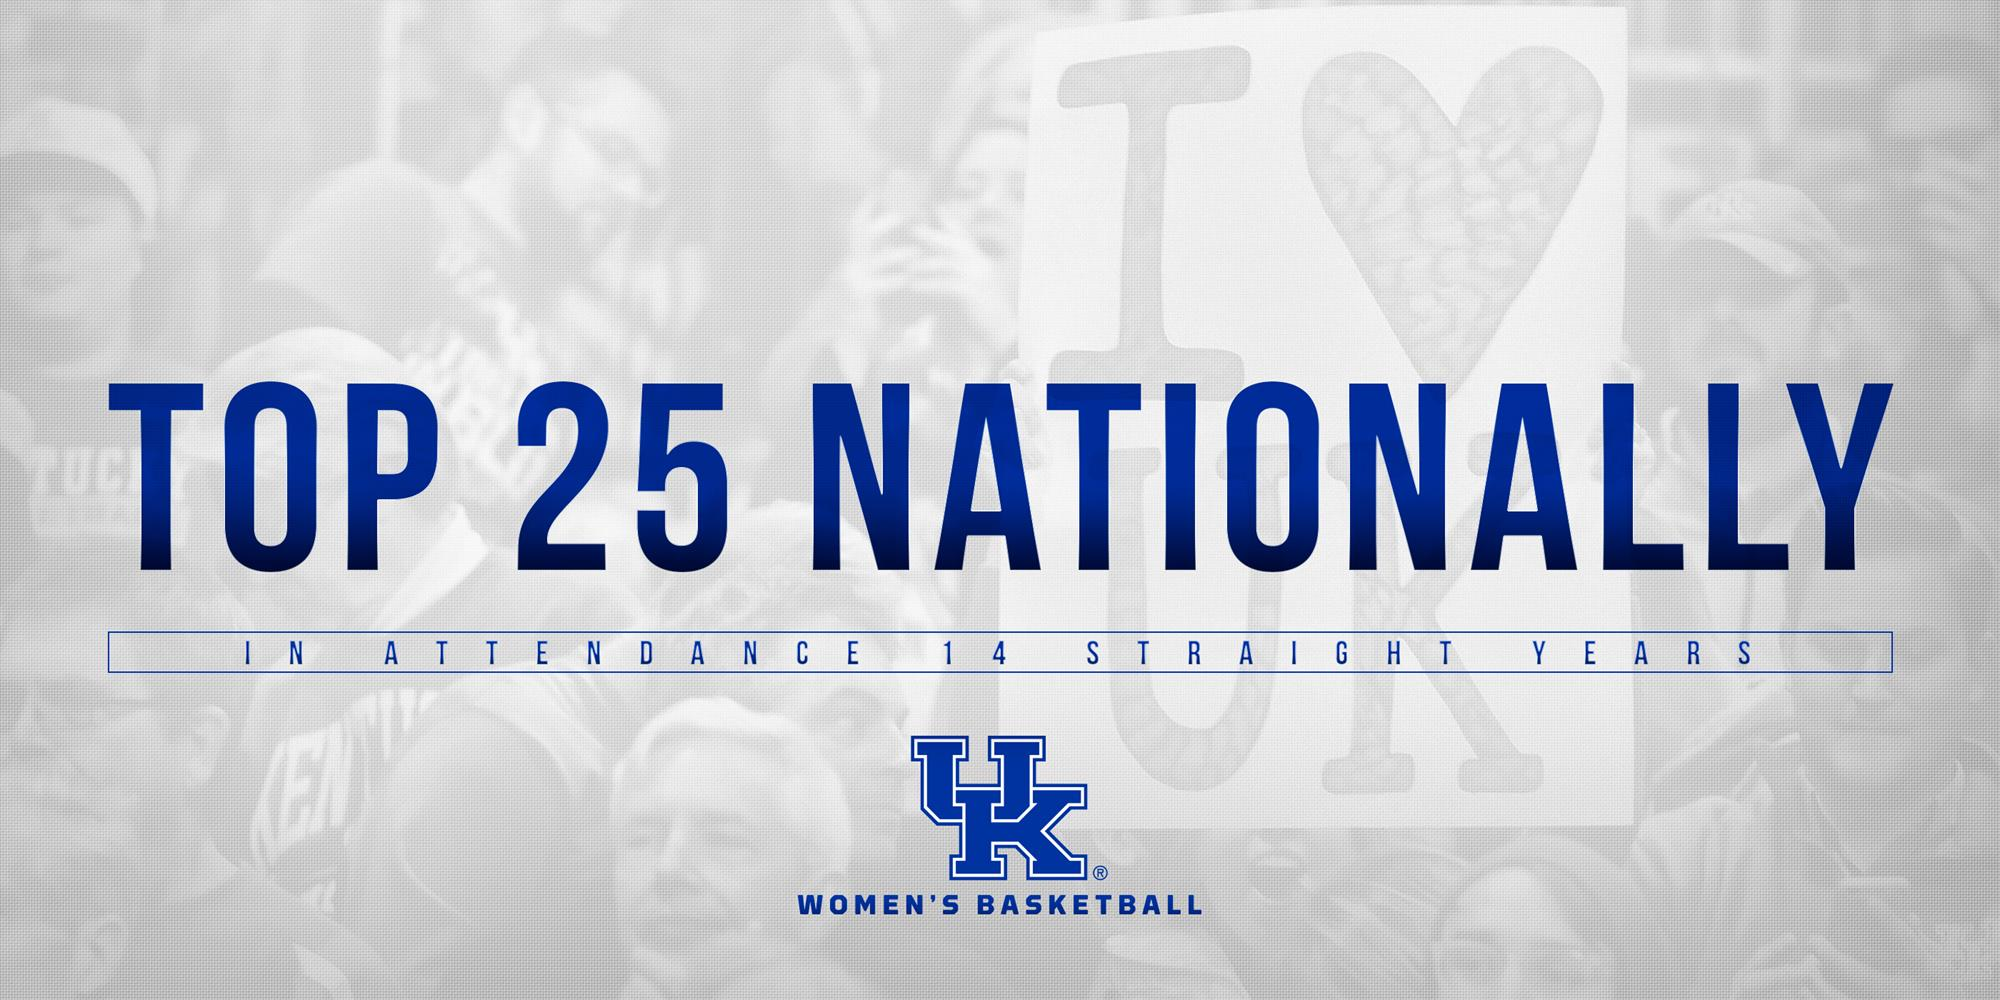 Women’s Basketball Ranks Top 25 in Attendance For 14th Year